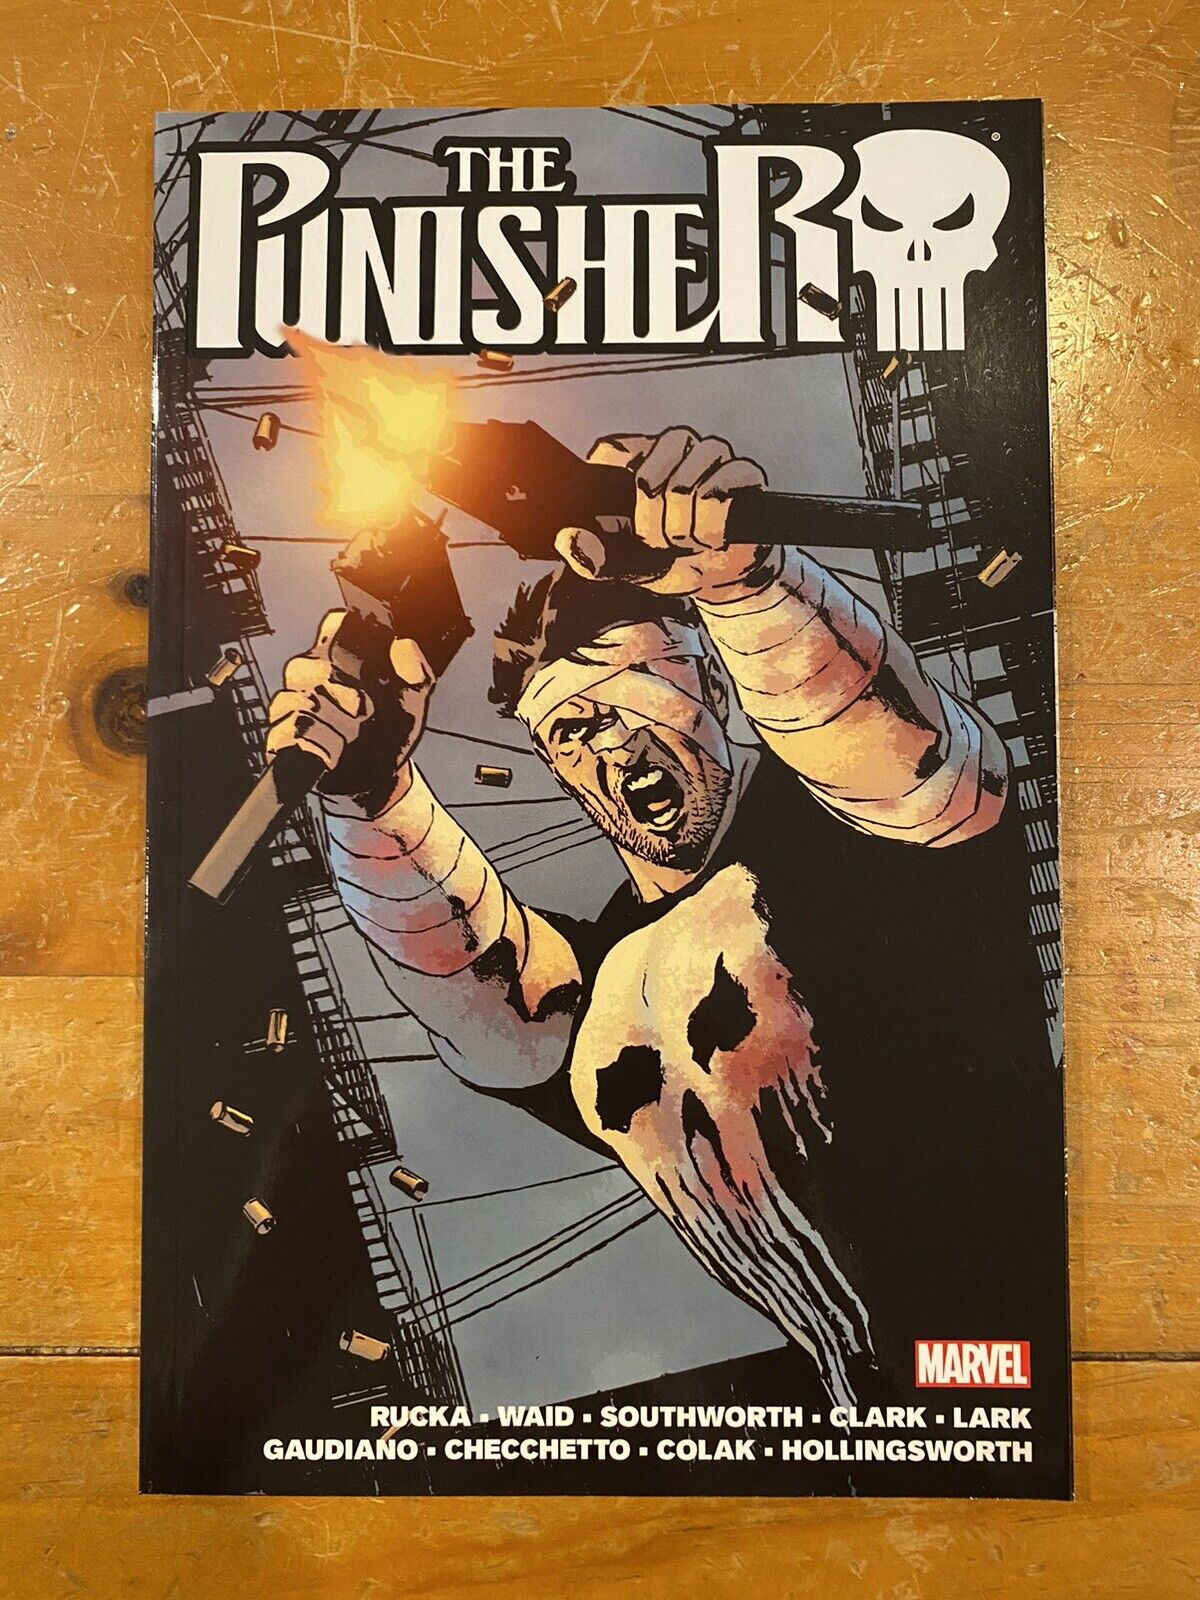 The Punisher TPB Vol 2 (Marvel Comics) by Greg Rucka